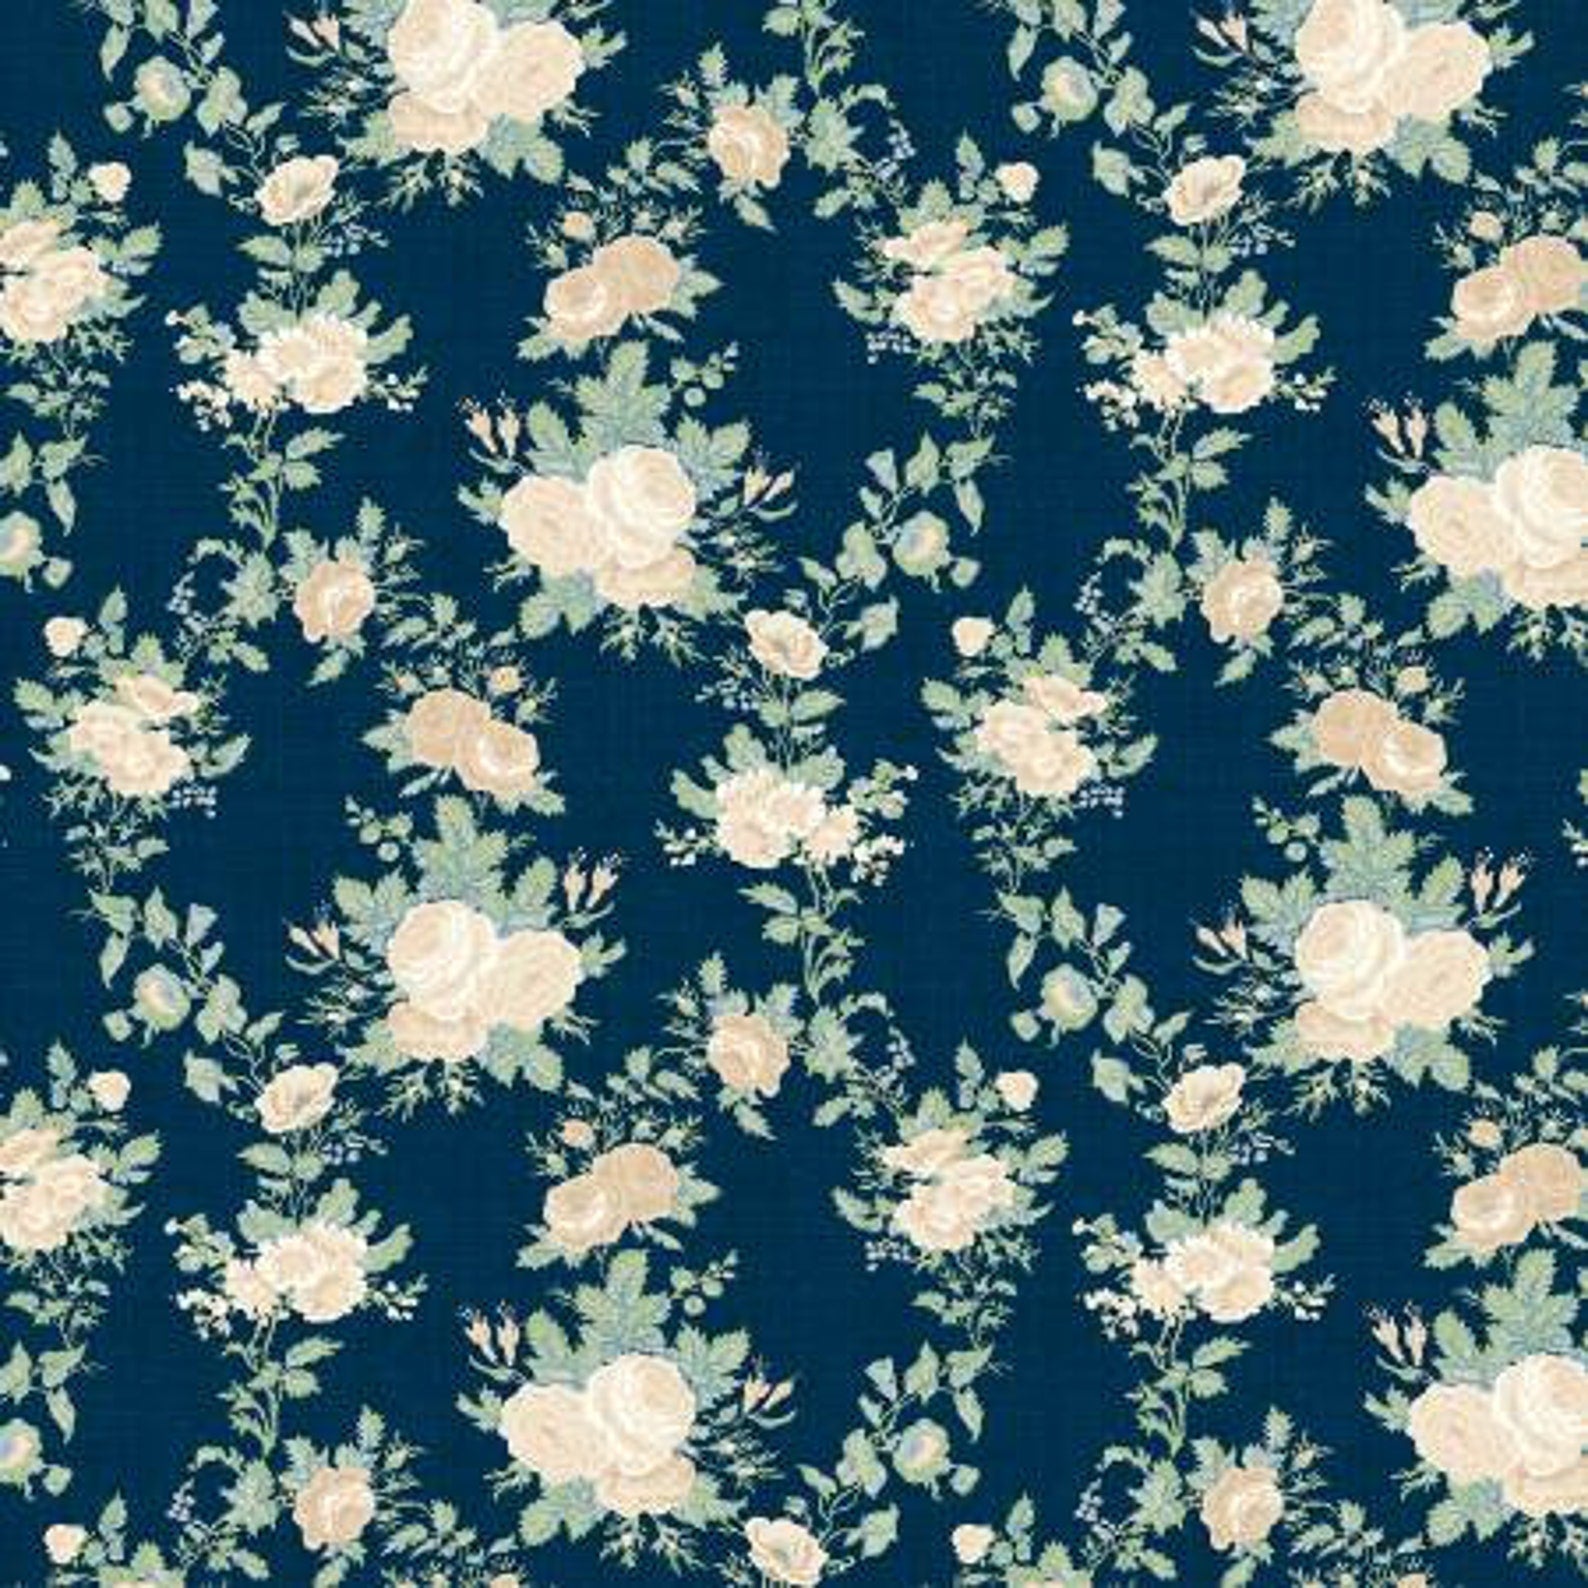 Sapphire Blossom Twined Roses Navy